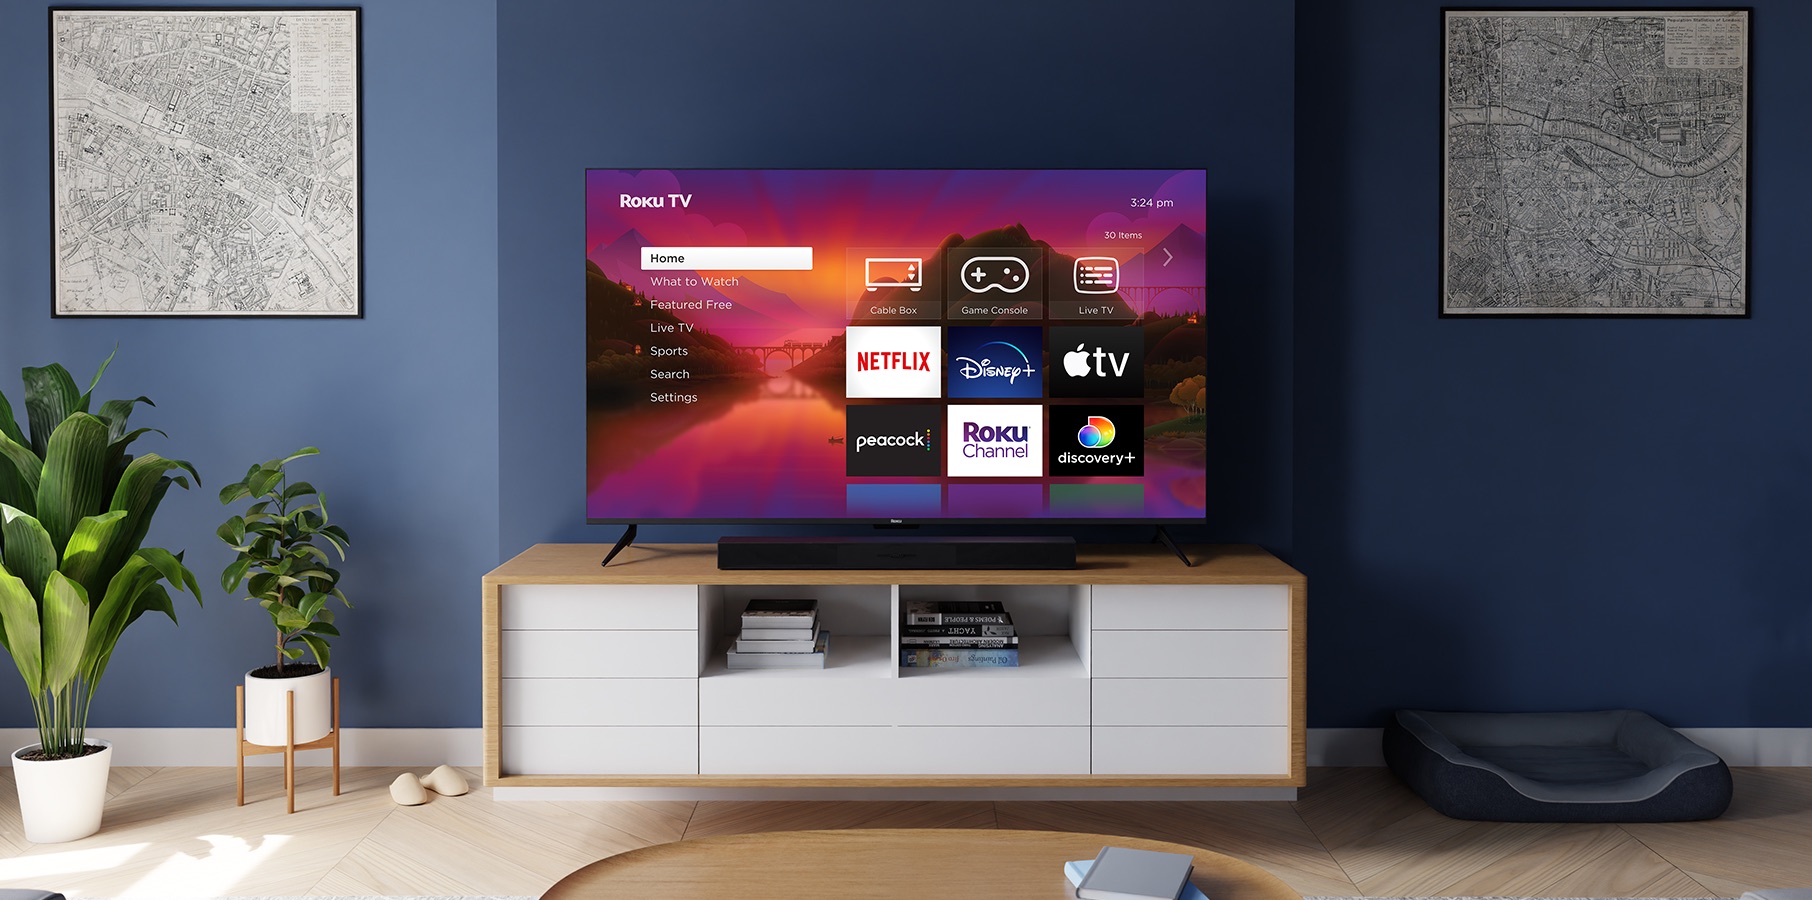 Roku releases its first-ever smart TV lineup alongside OS 12 update